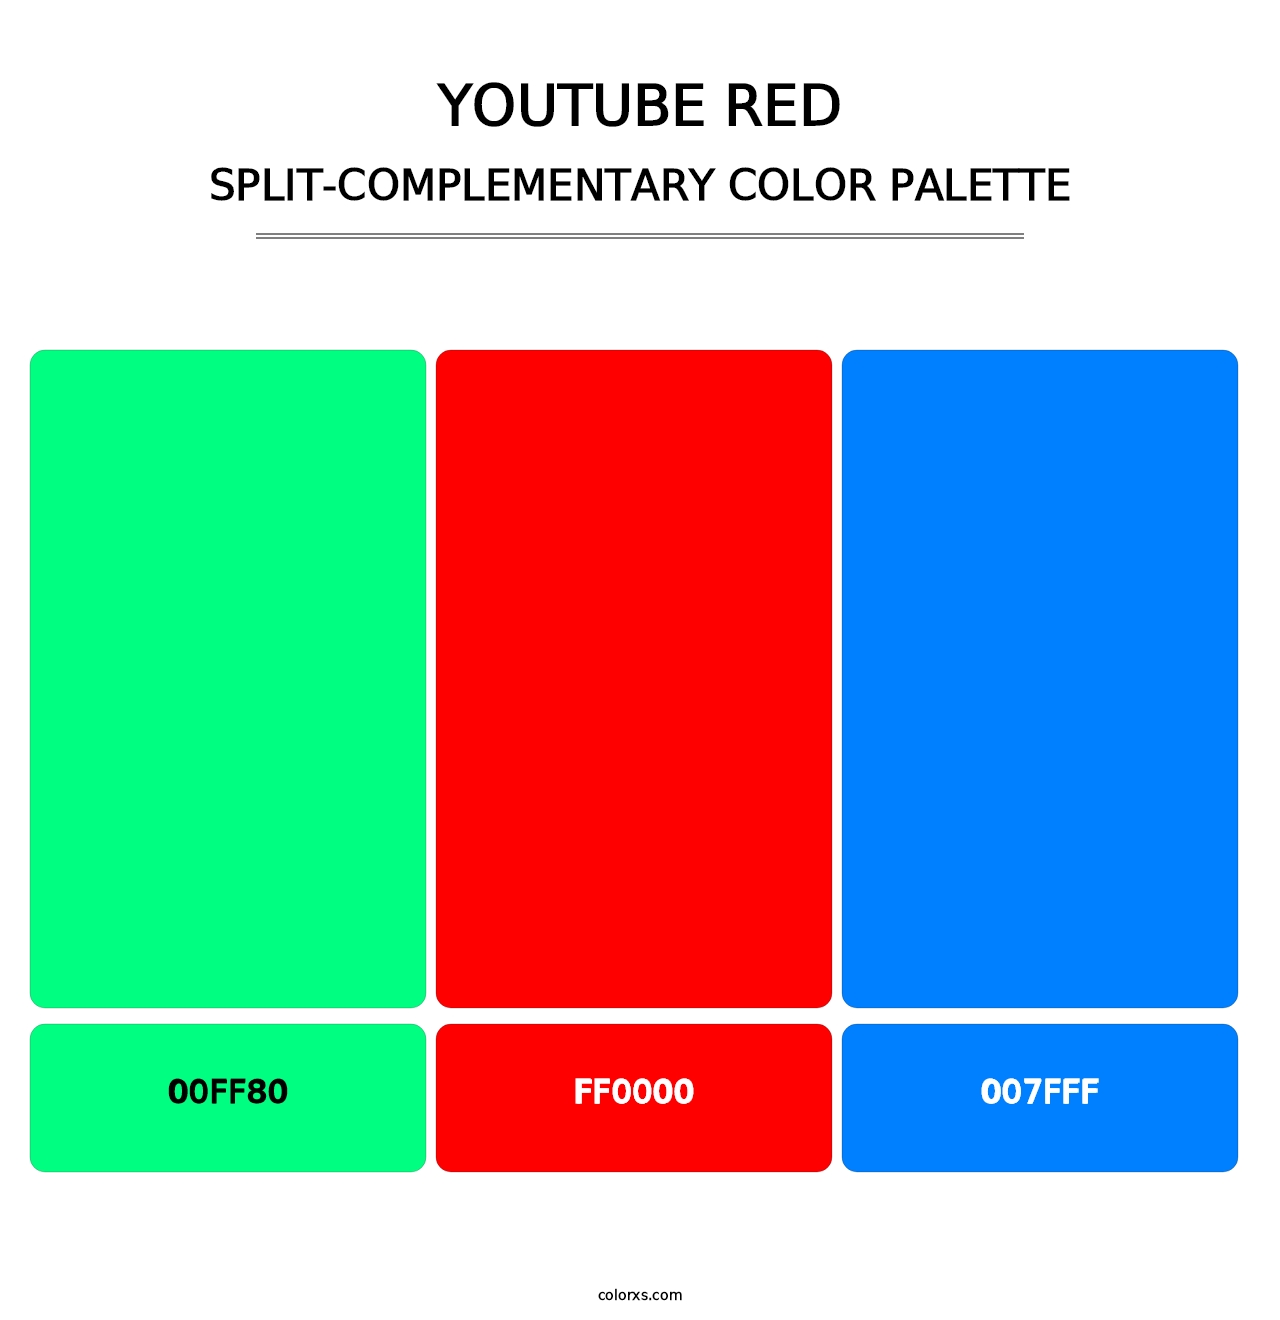 YouTube Red - Split-Complementary Color Palette